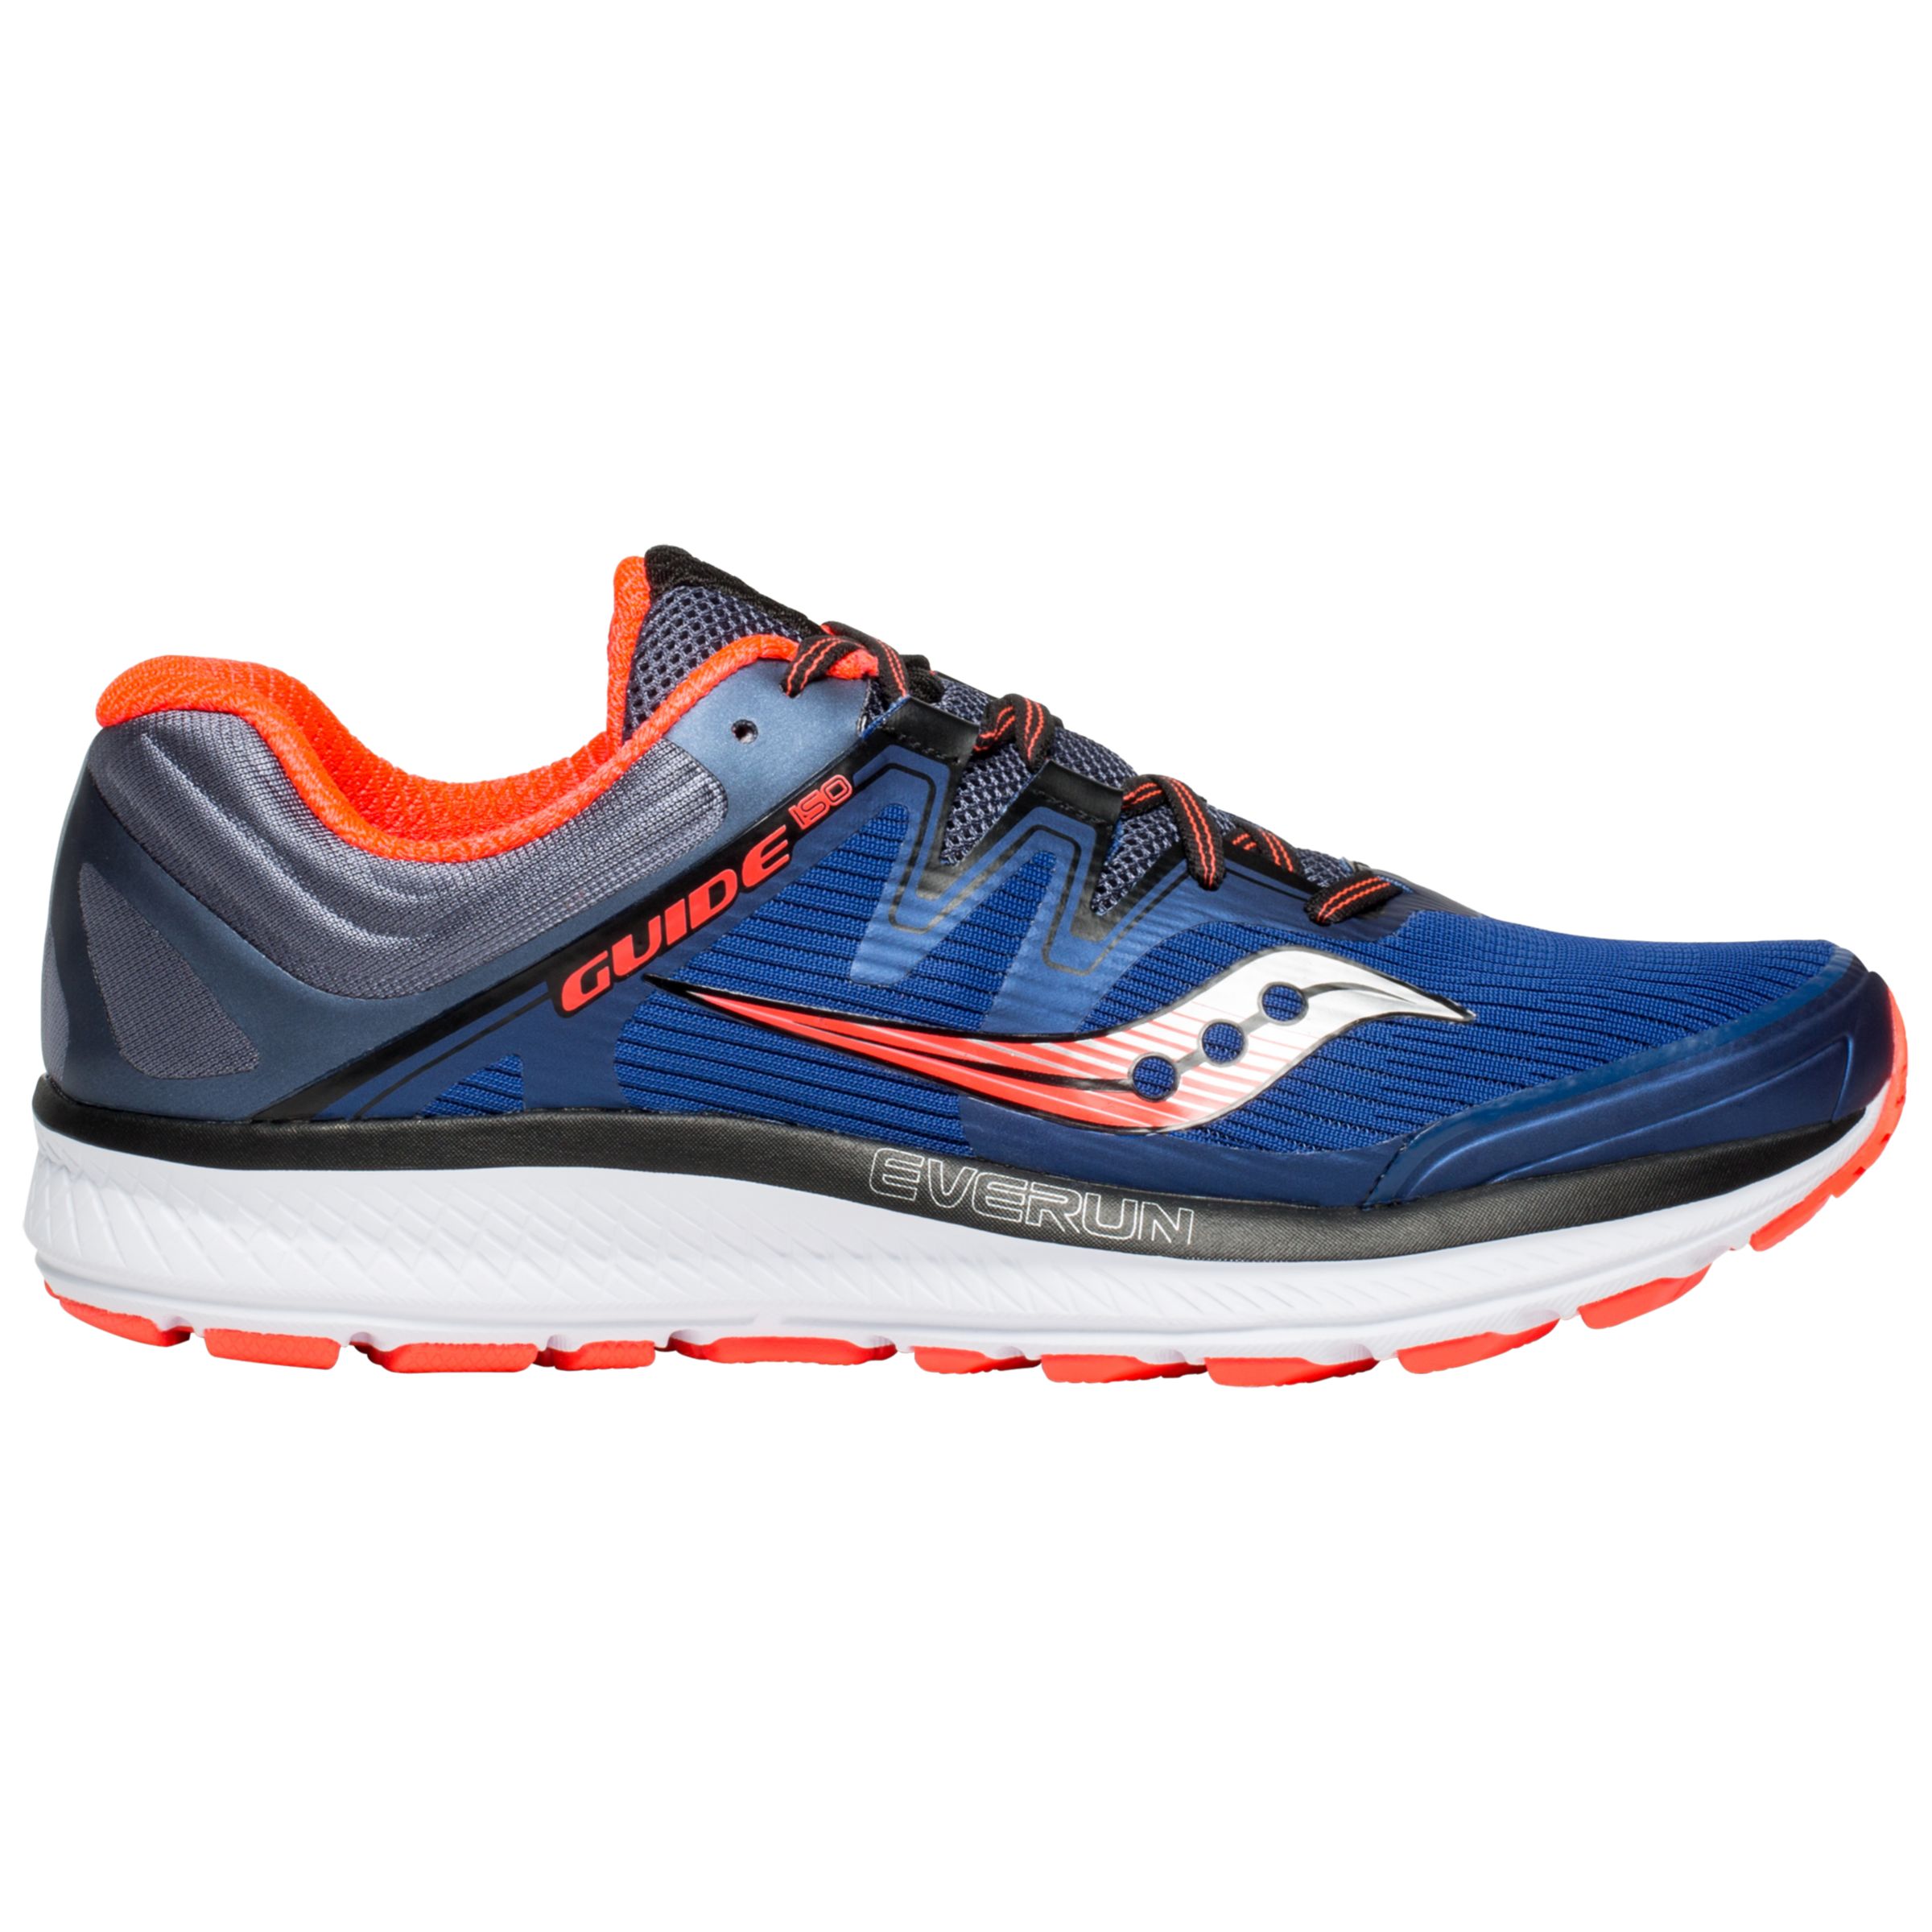 Saucony Guide 10 ISO Men's Running Shoes, Blue/Grey/Vizired